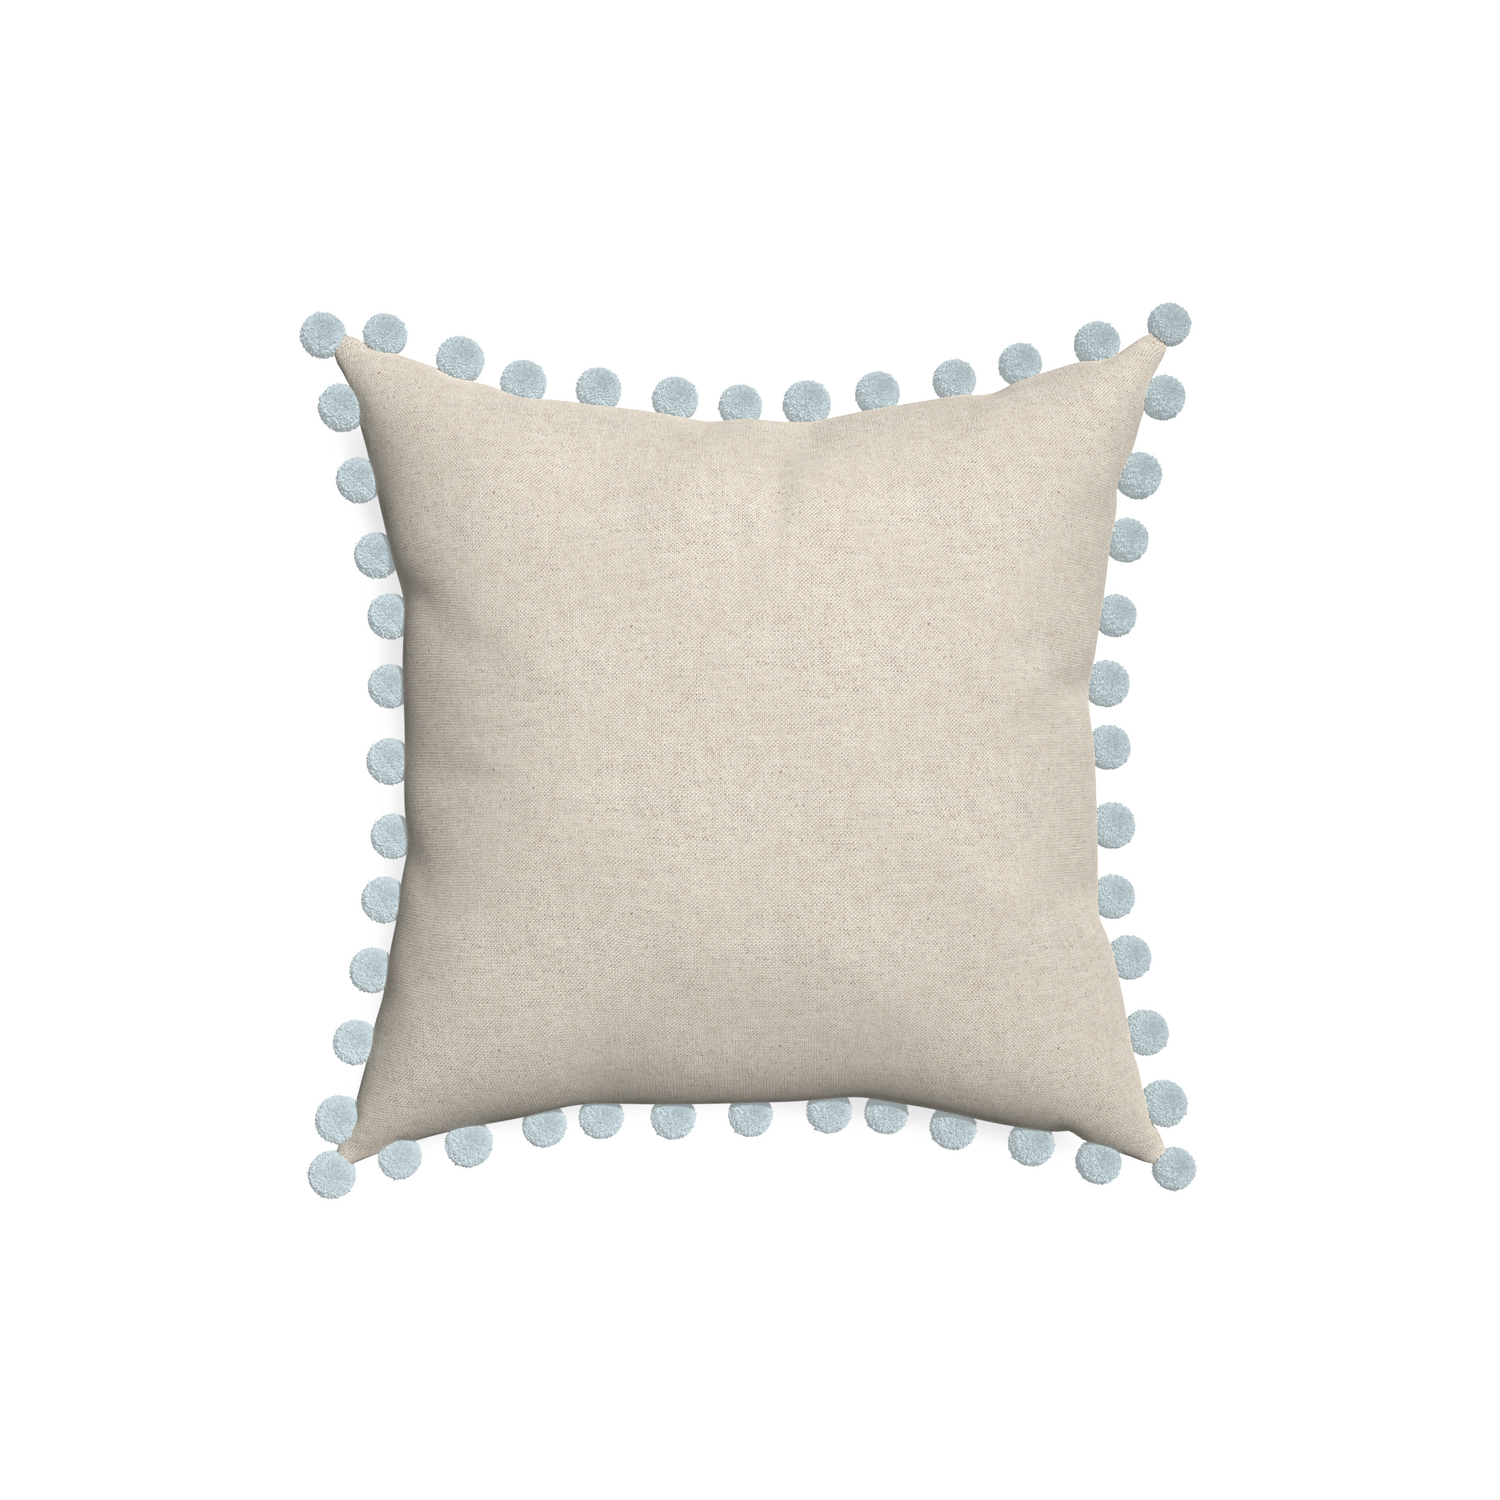 18-square oat custom light brownpillow with powder pom pom on white background